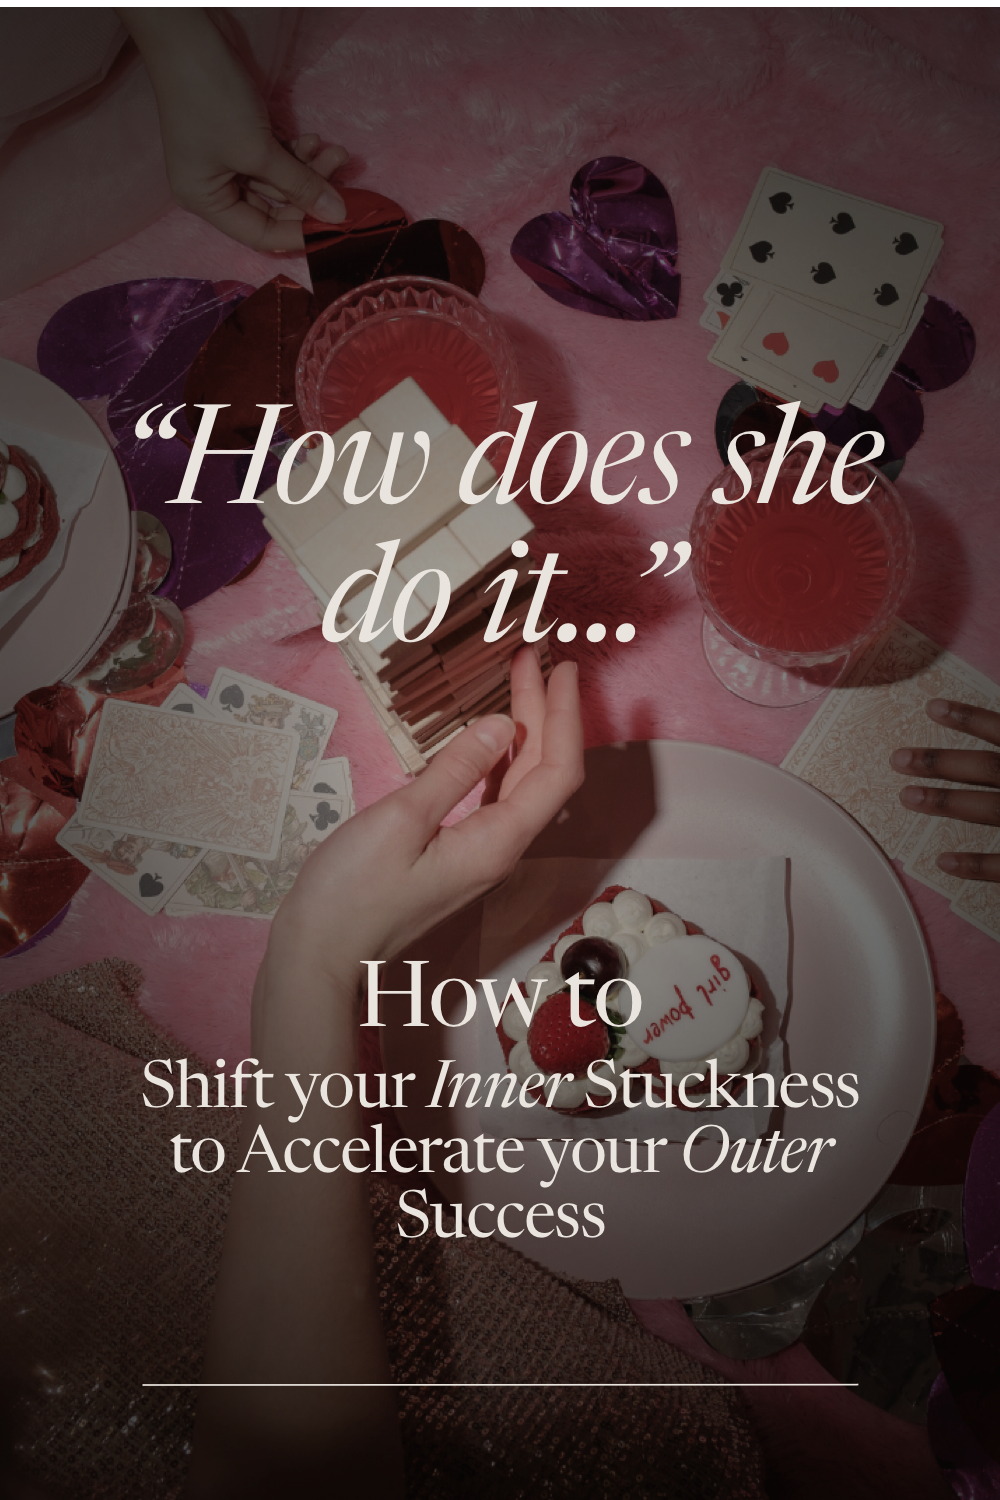 Carolynne Alexander | Shift your Inner Stuckness to Accelerate your Outer Success